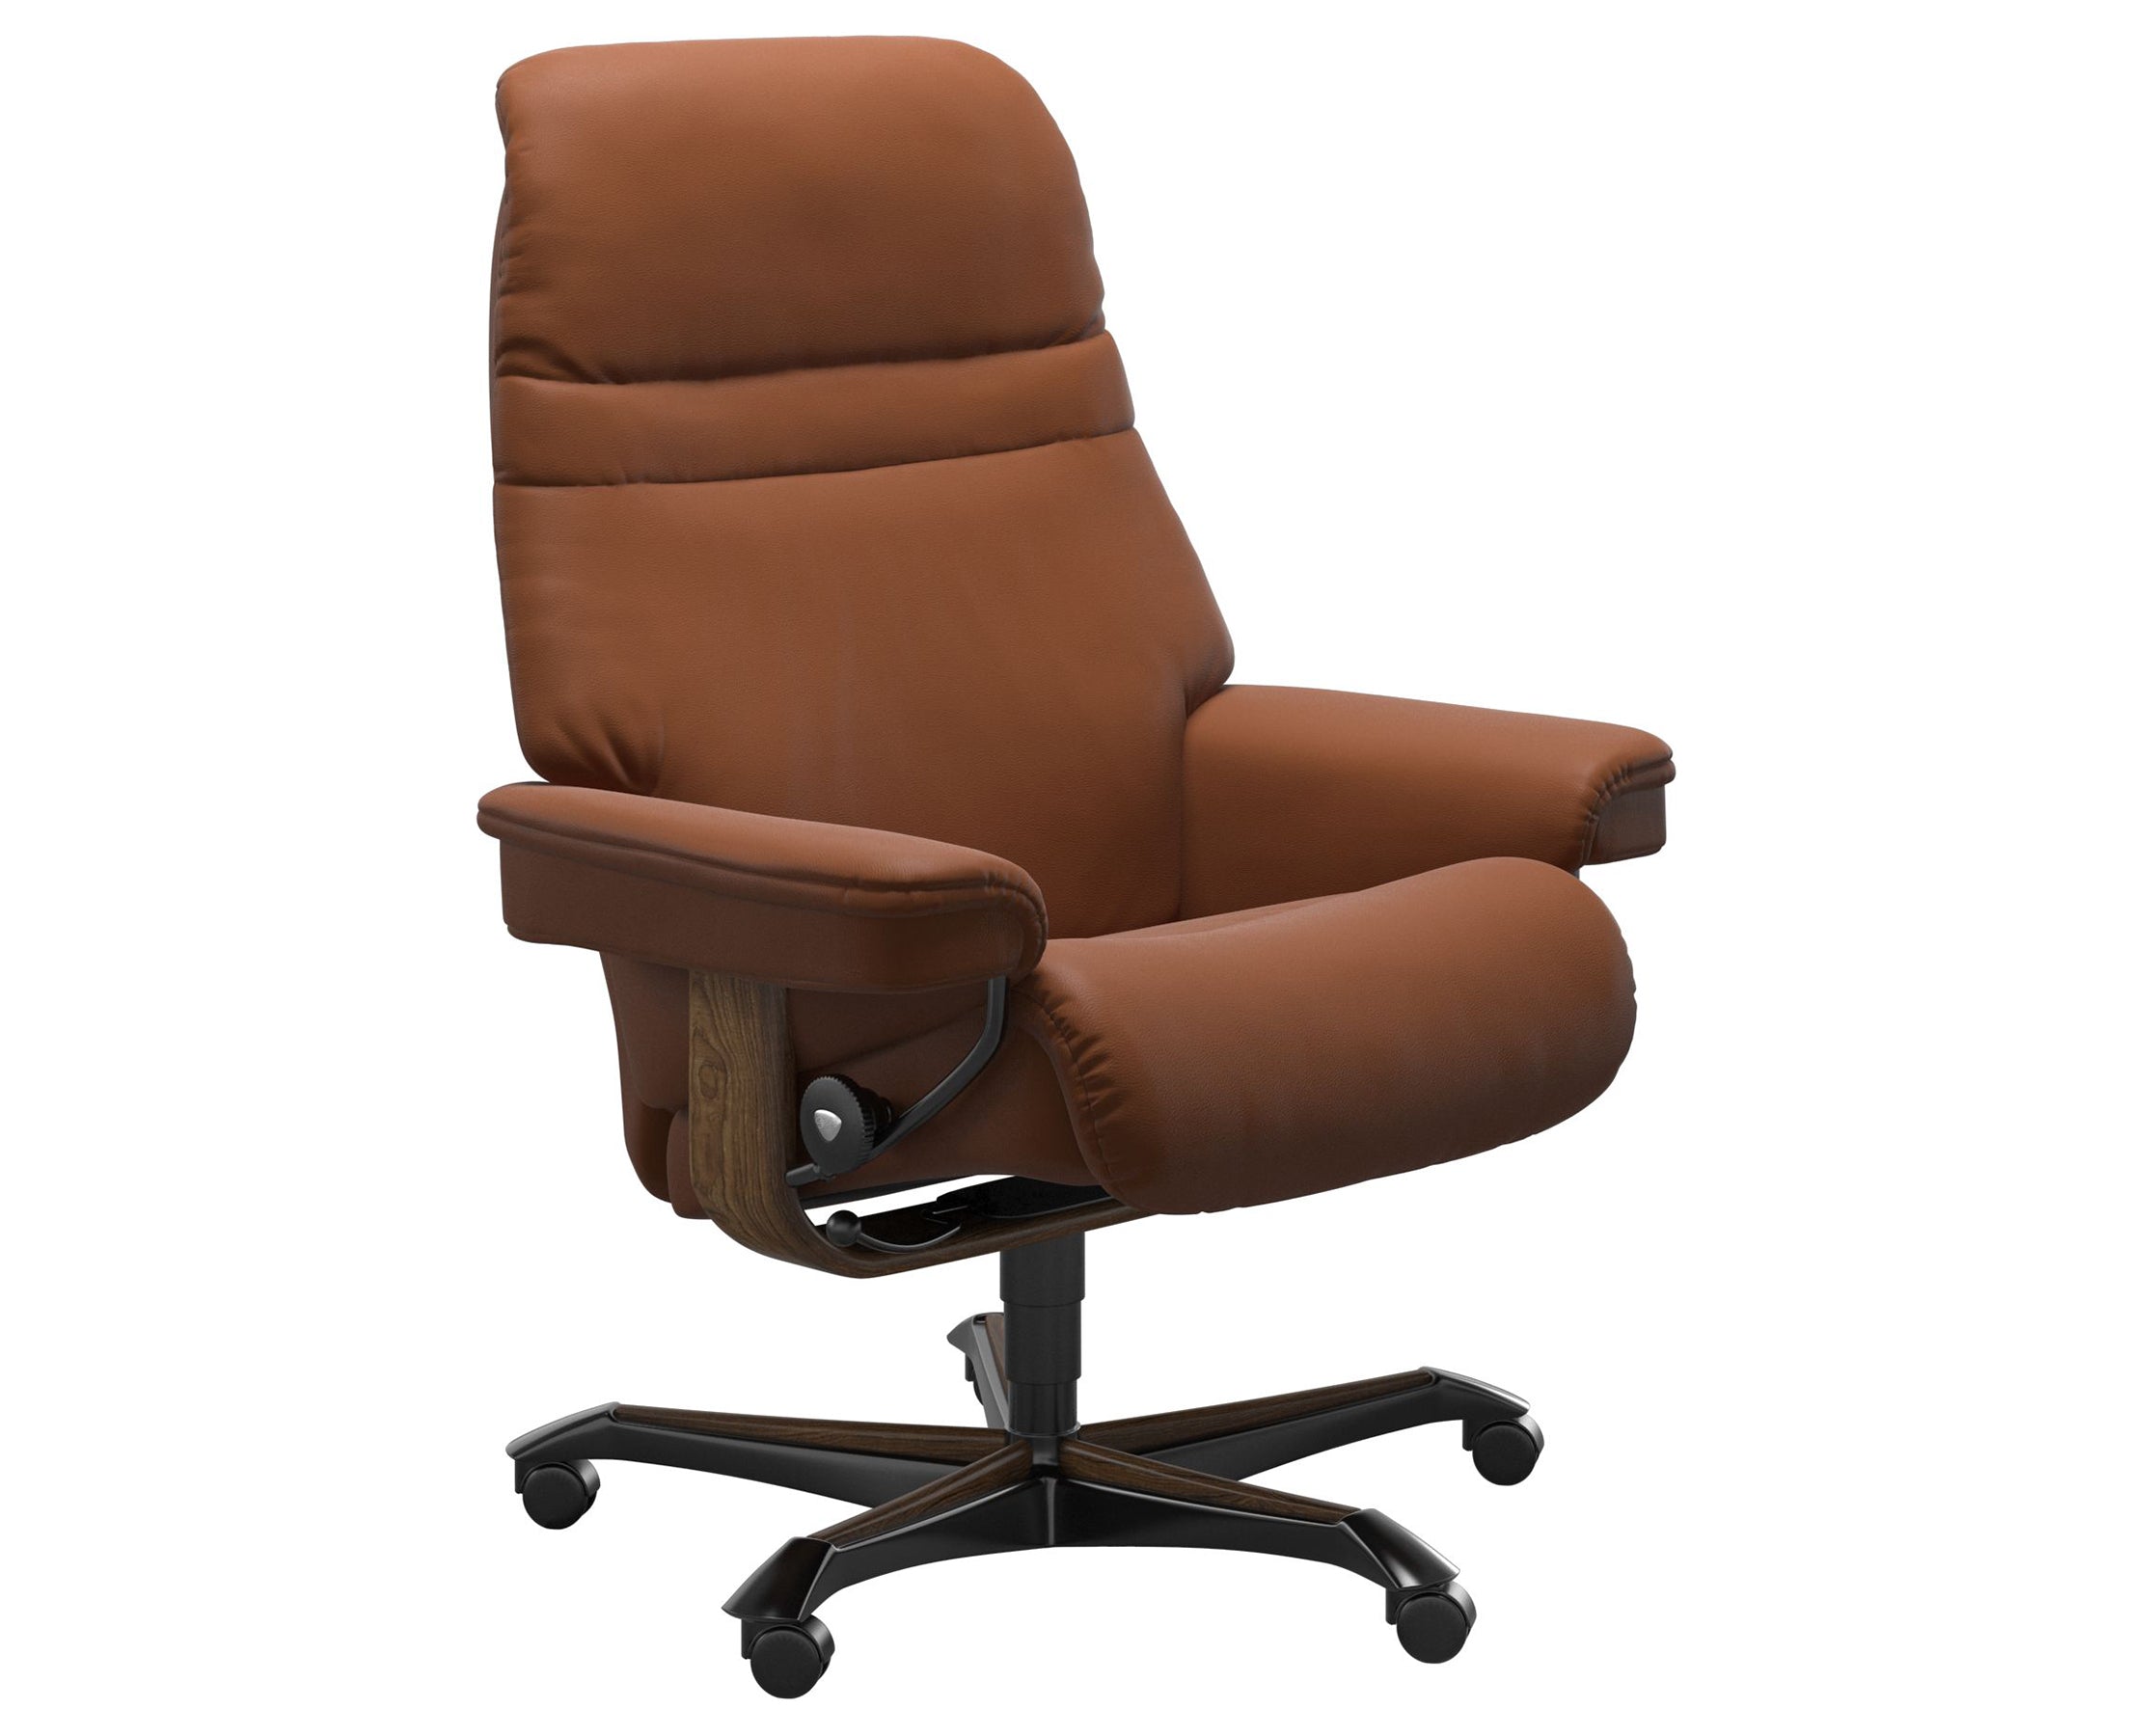 Paloma Leather New Cognac M and Teak Base | Stressless Sunrise Home Office Chair | Valley Ridge Furniture